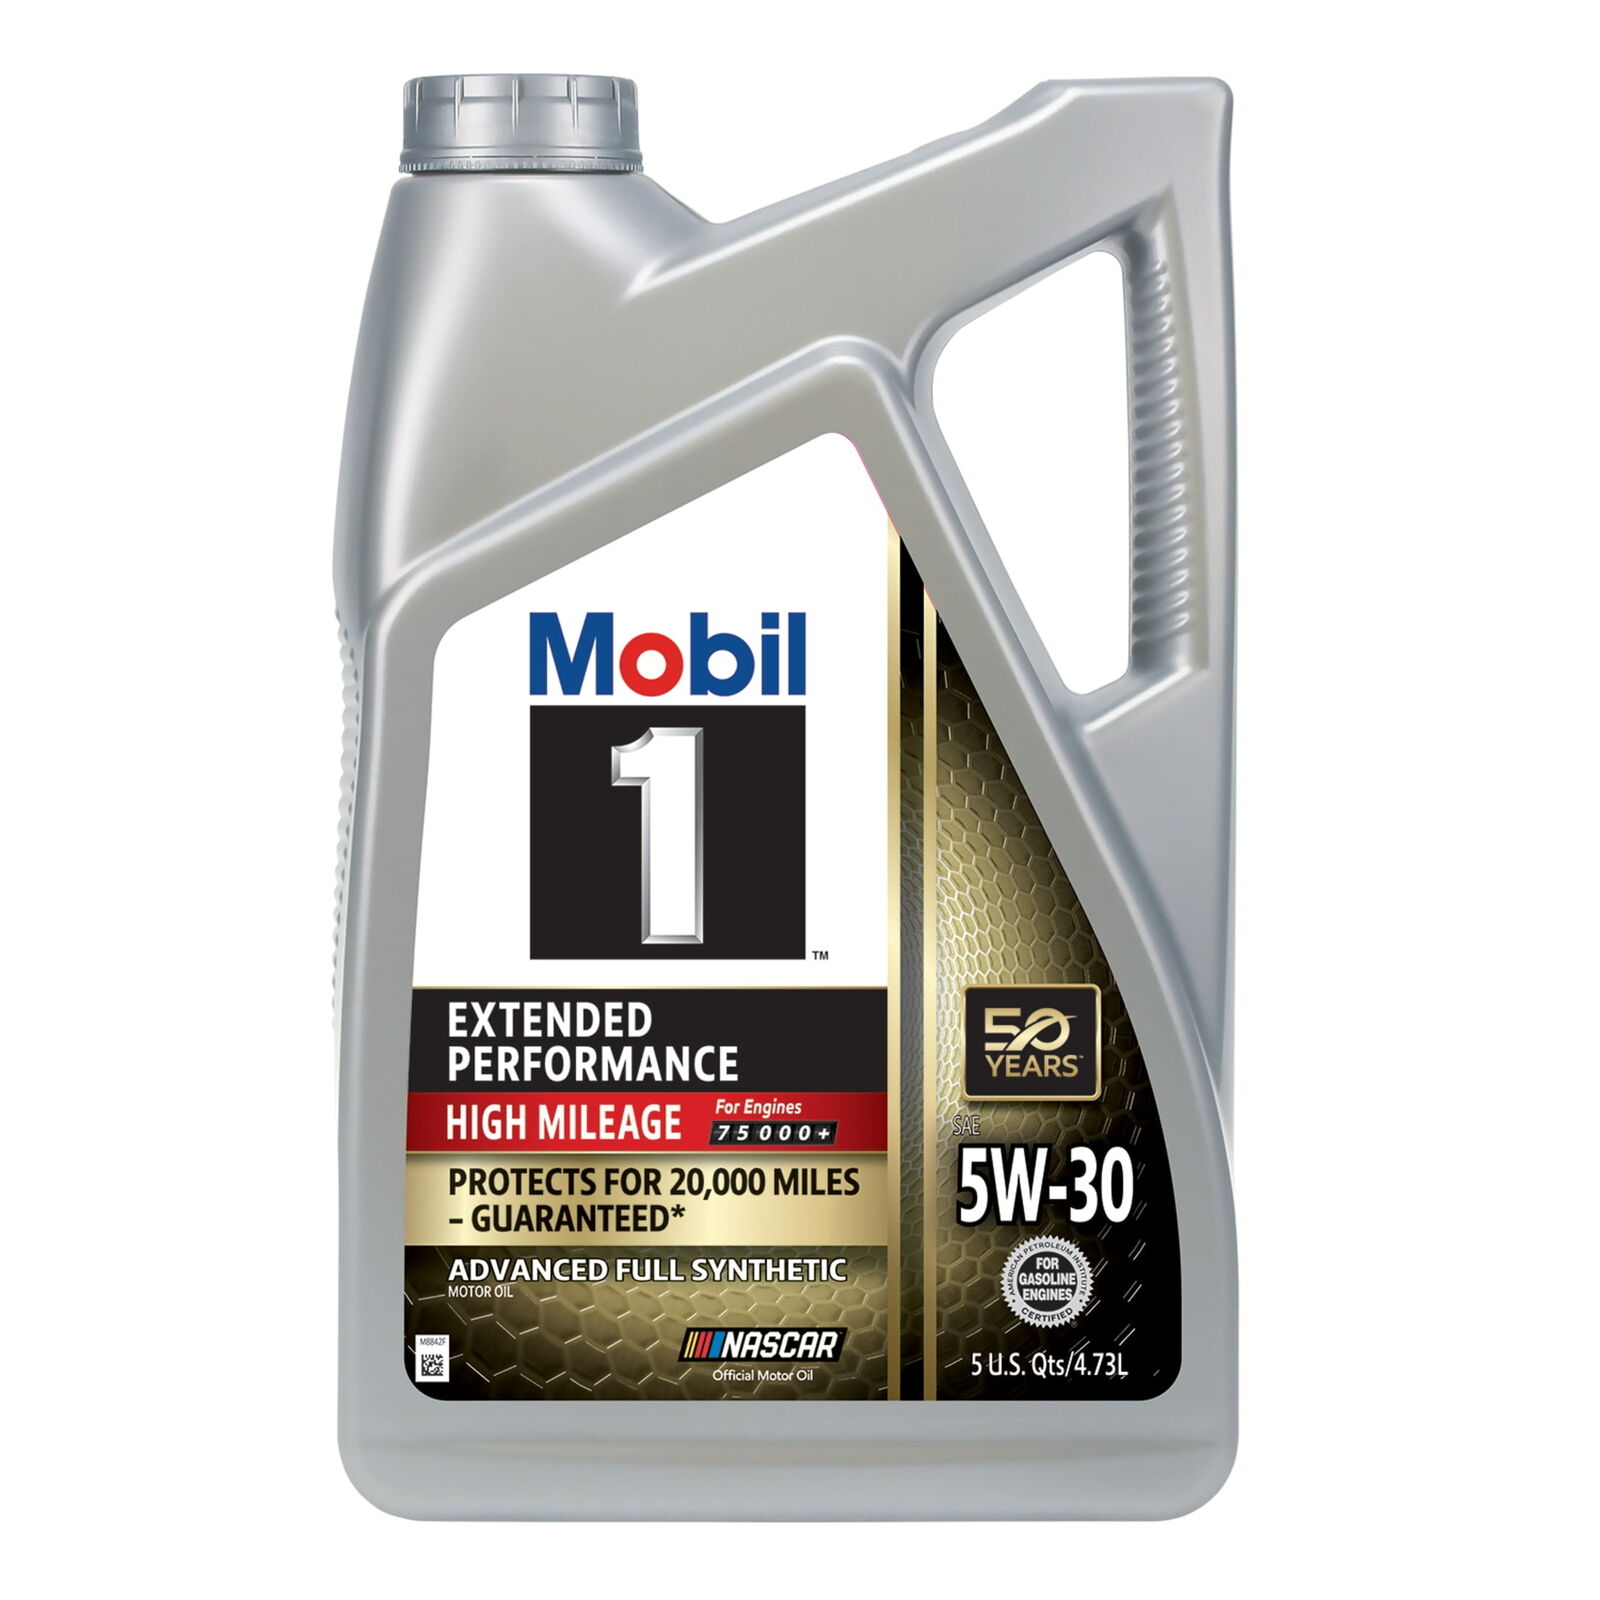 Extended Performance High Mileage Full Synthetic Motor Oil 5W-30, 5 Quart